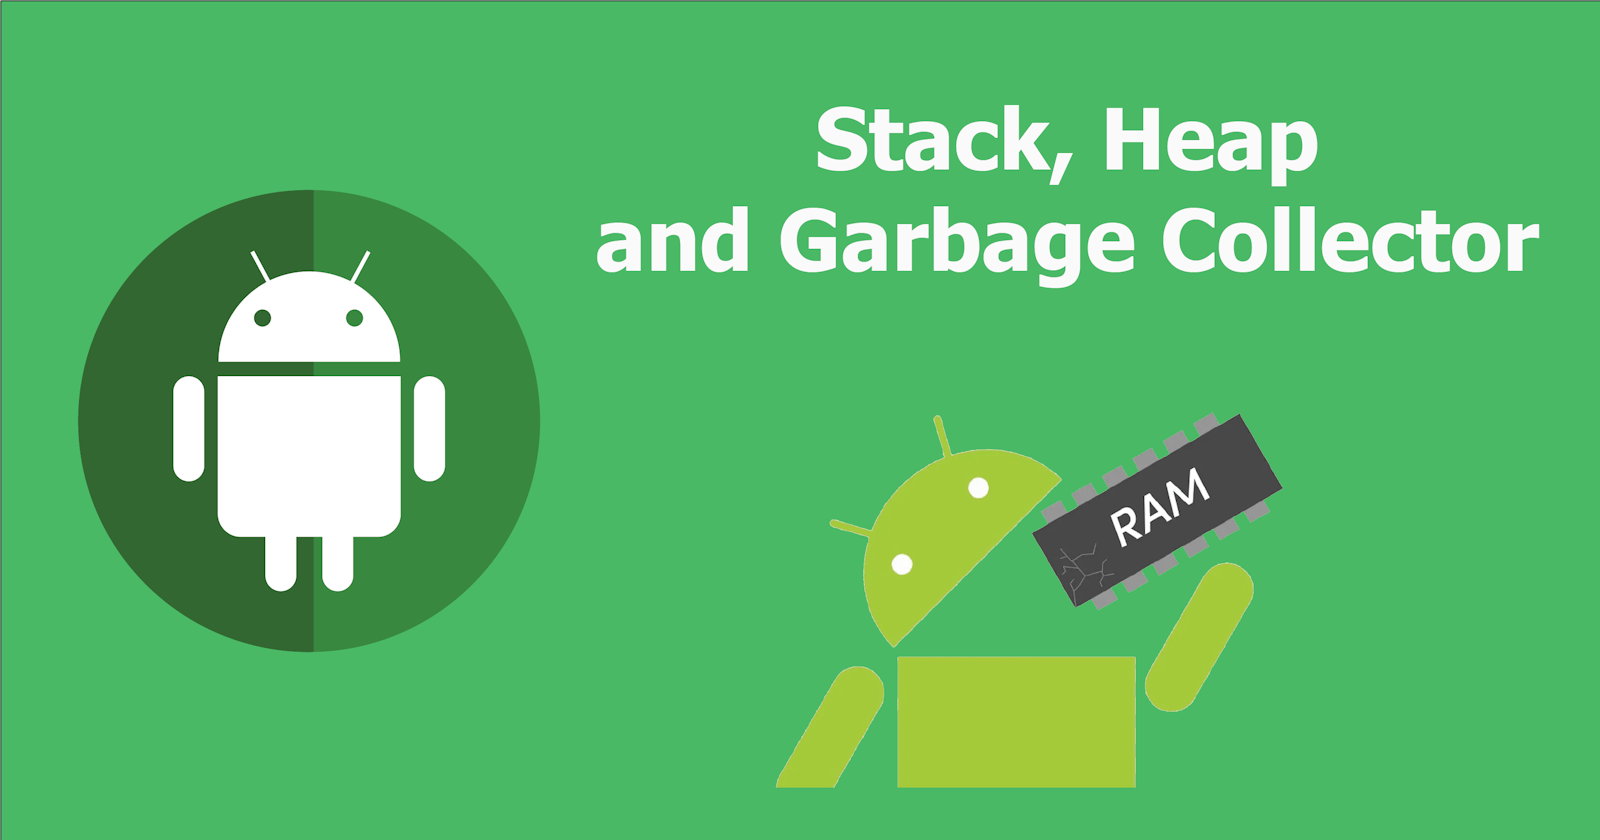 Android Memory Management #1:
Stack, Heap and Garbage Collector